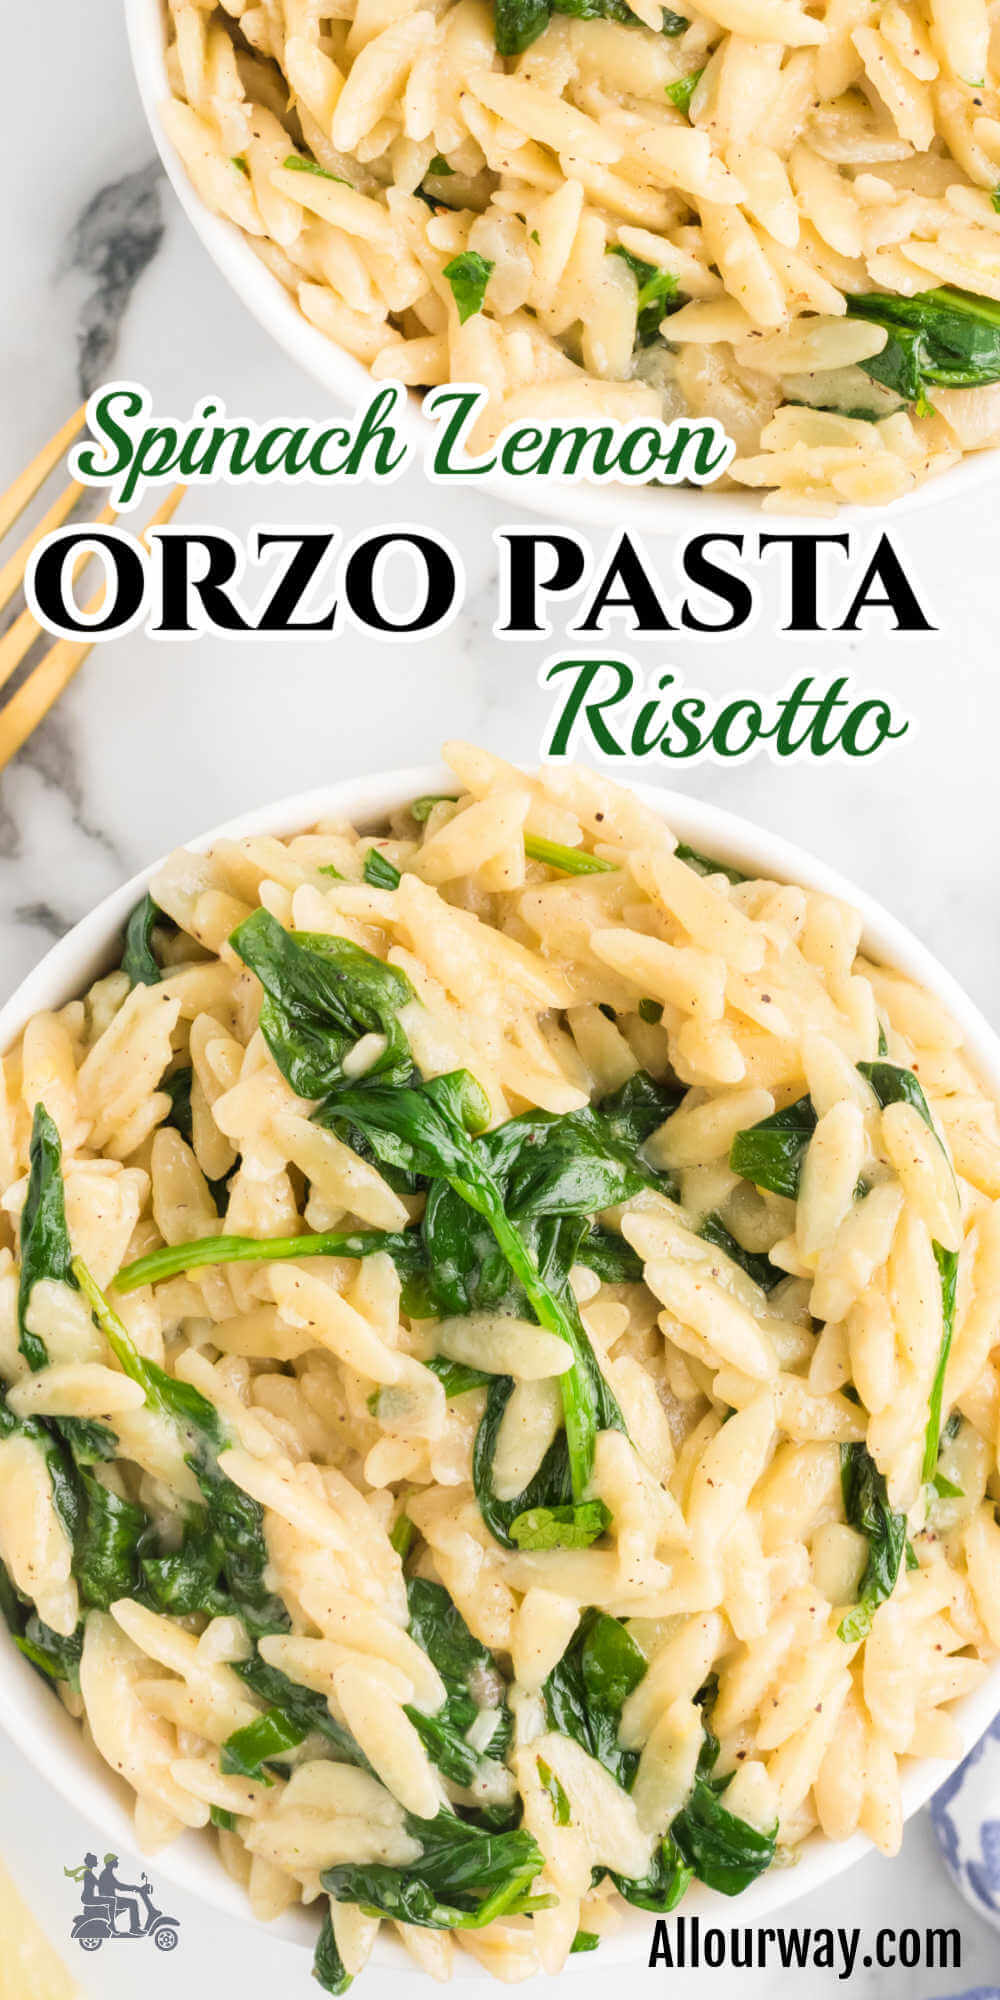 Pinterest image with title overlay for Orzo Pasta with Spinach and Lemon risotto.